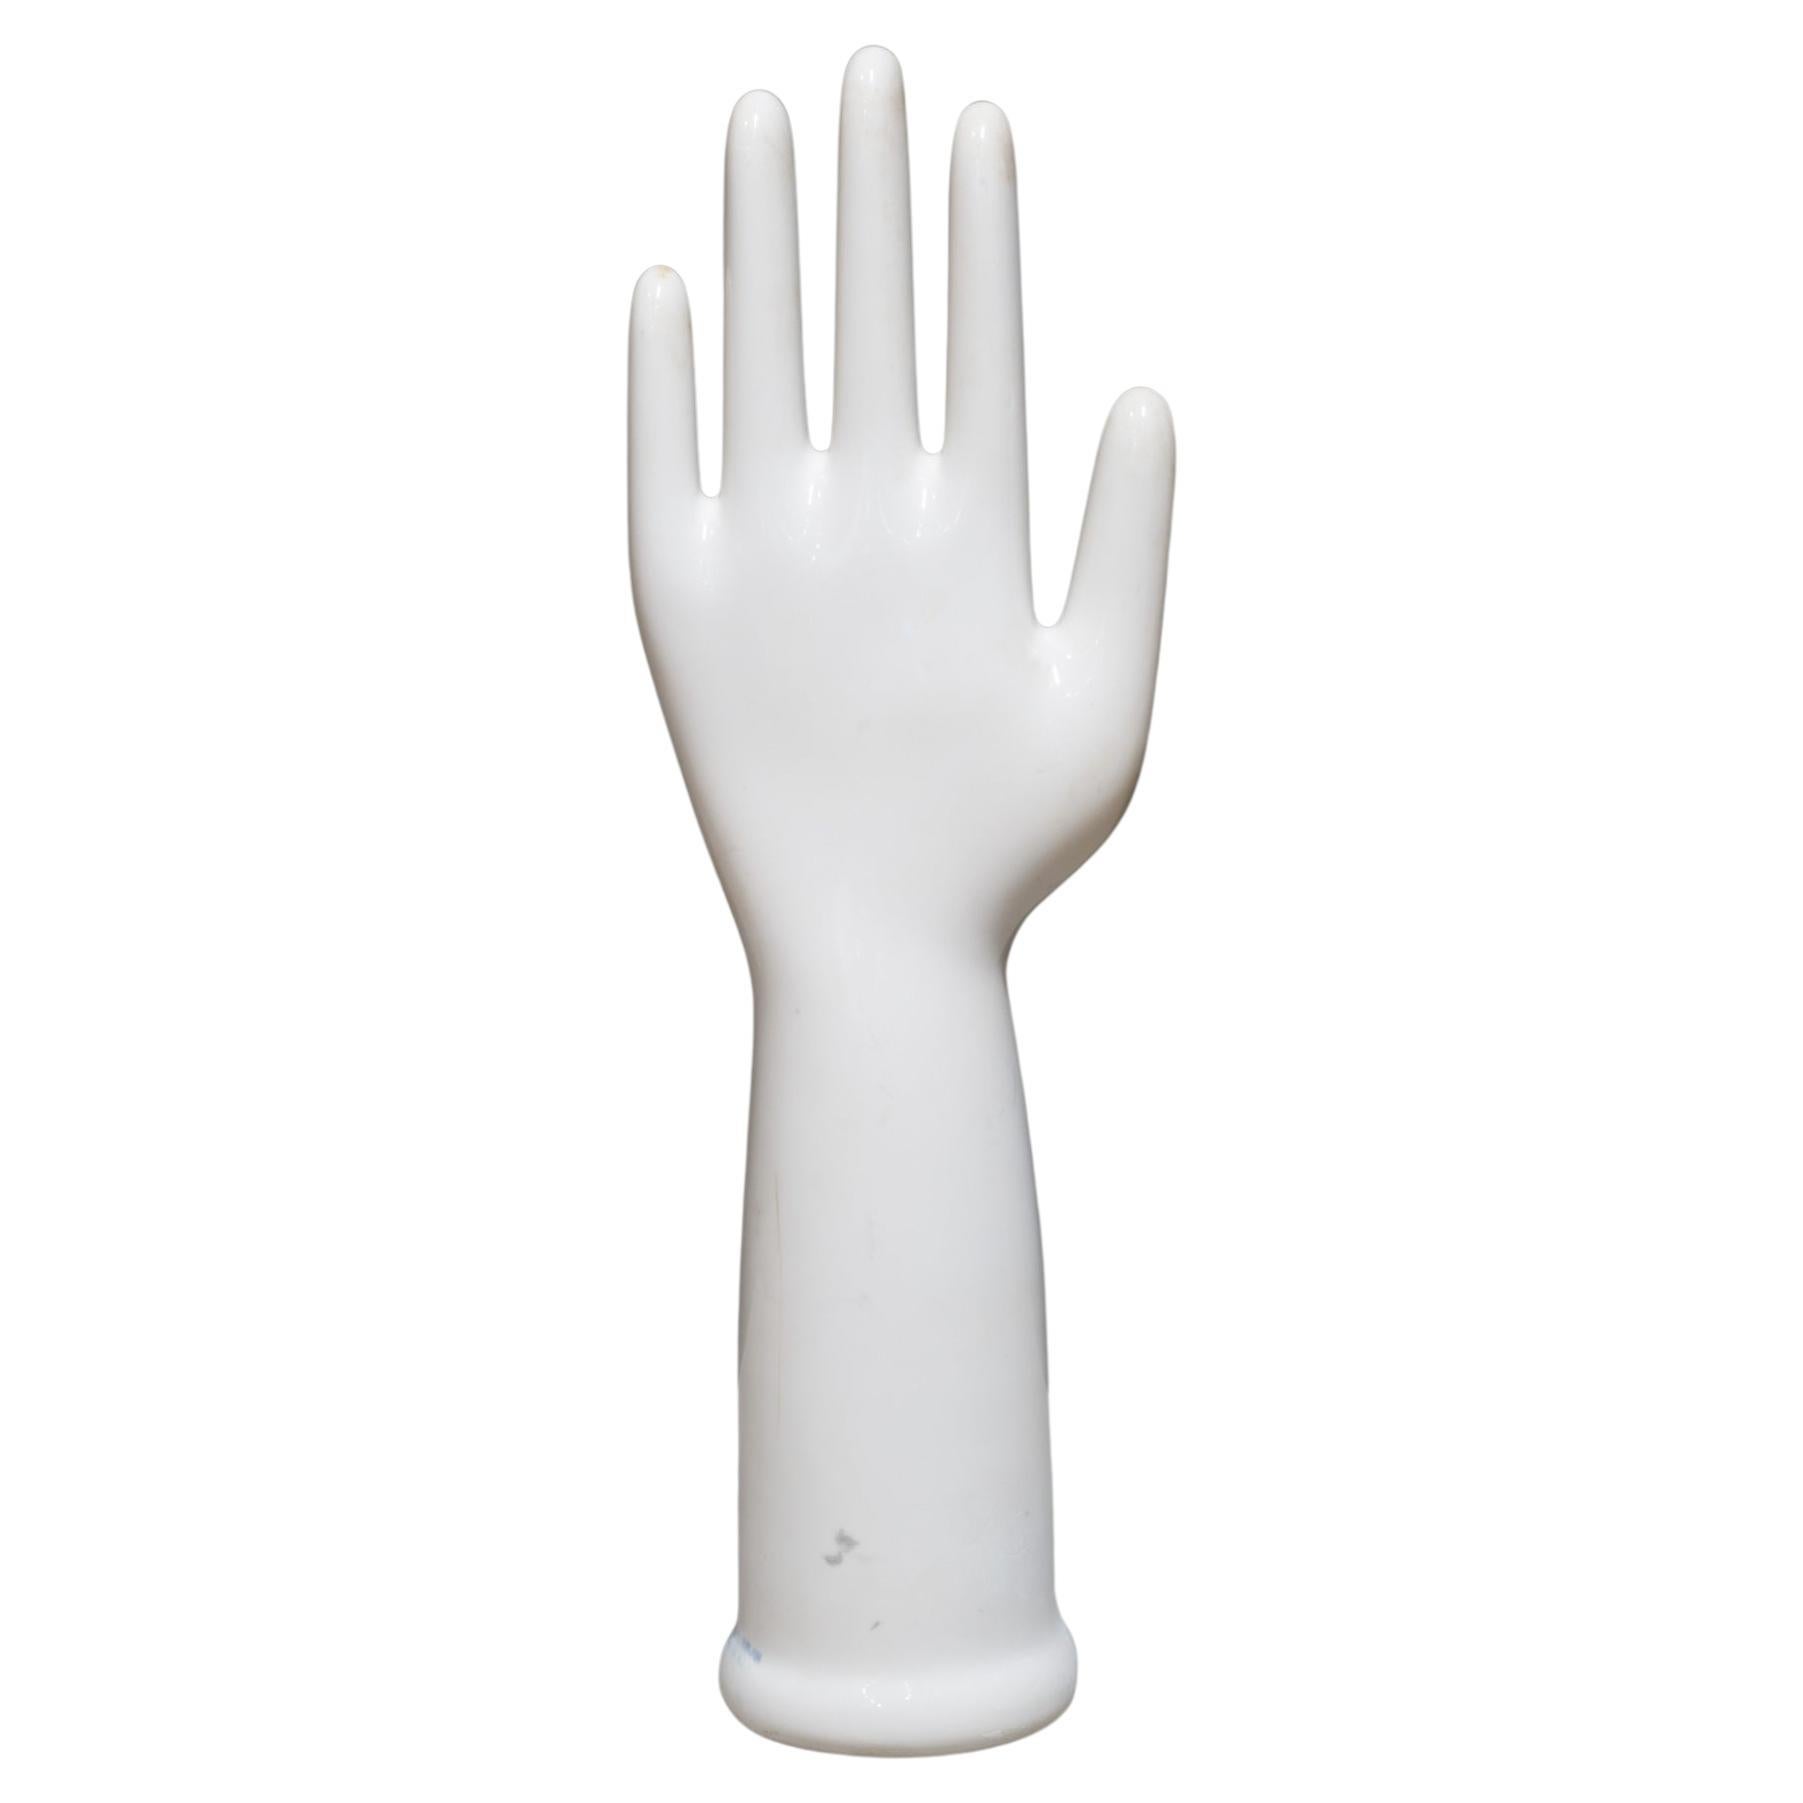 ABOUT

Price is per piece. Six extra large molds, four large, and eight medium molds available.

Original glazed porcelain rubber glove molds. Very thick. Each is stamped 